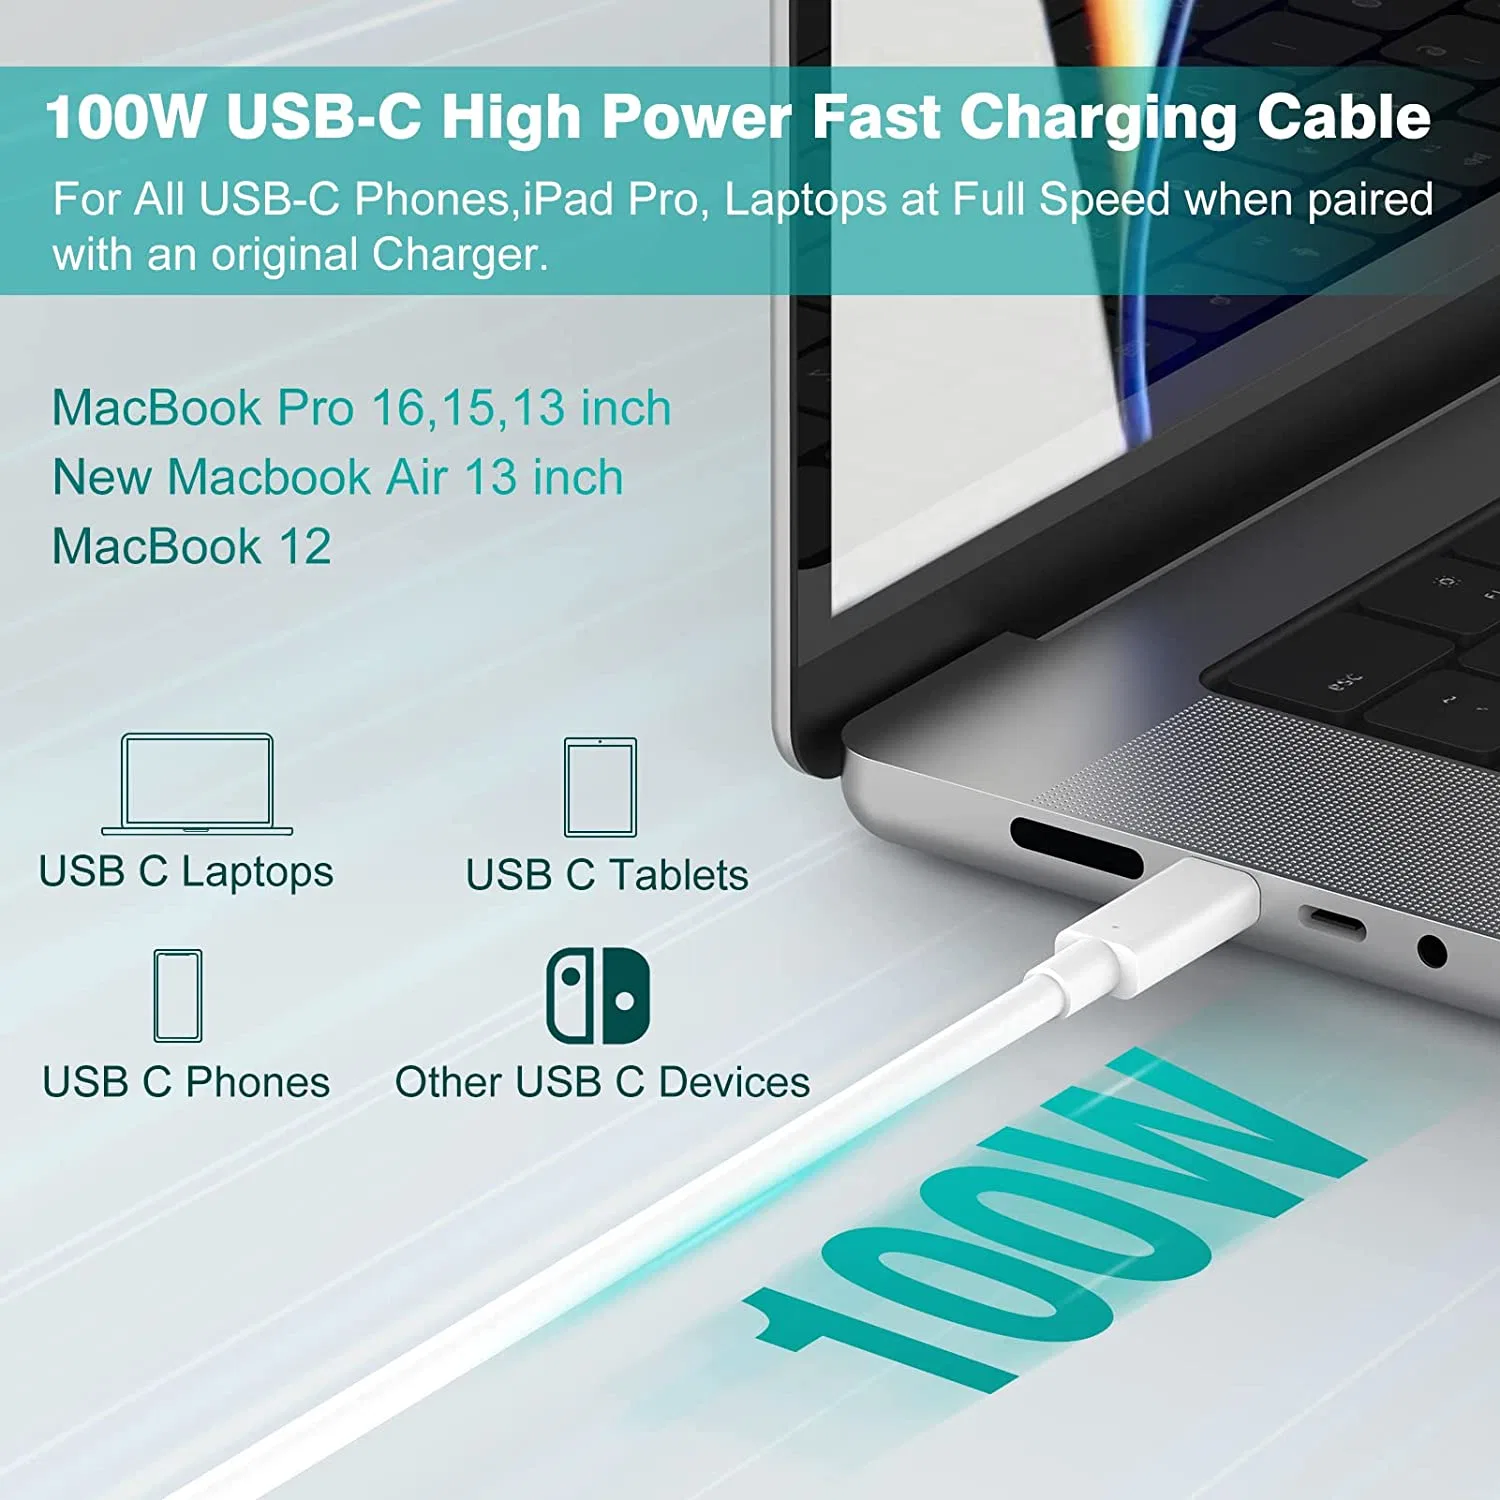 New Product Factory Price 0.25M 1M 2M 3M 5M 3A 5A Mobile Phone Fast Charger USB C to USB C Communication Data Cable for Samsung/Xiaomi Android Phones